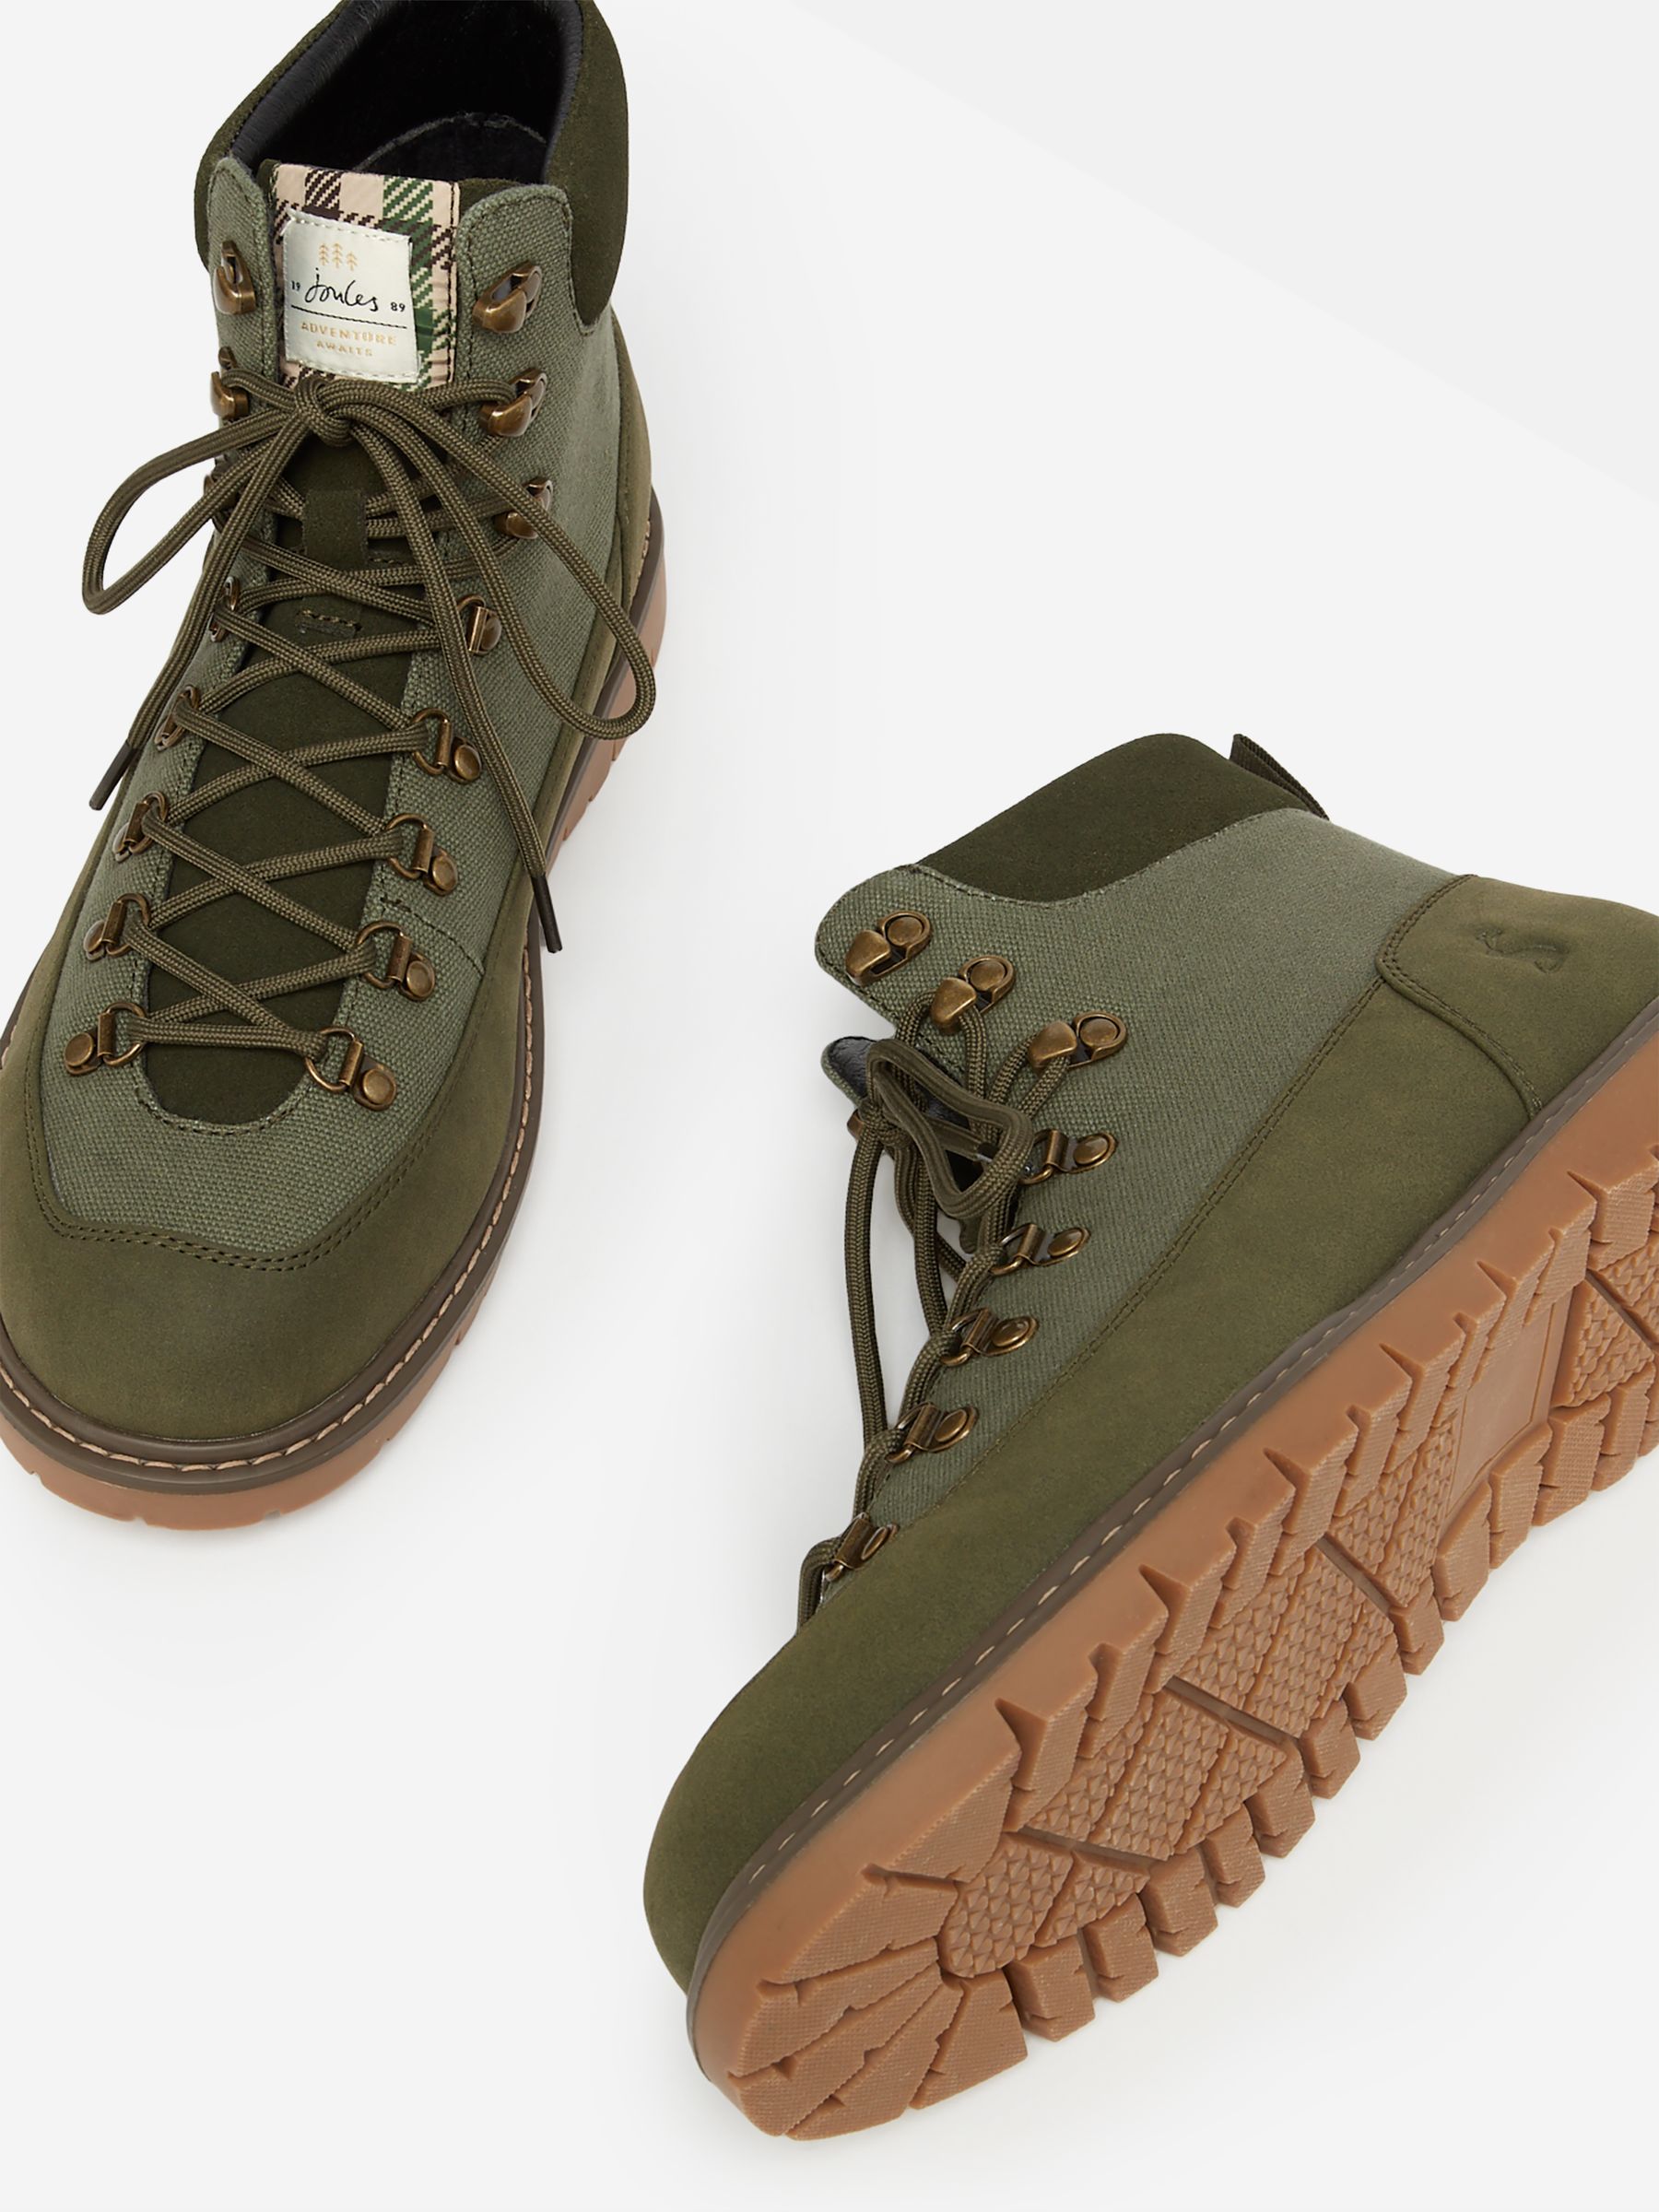 Buy Chester Khaki Green Lace Up Boots from the Joules online shop